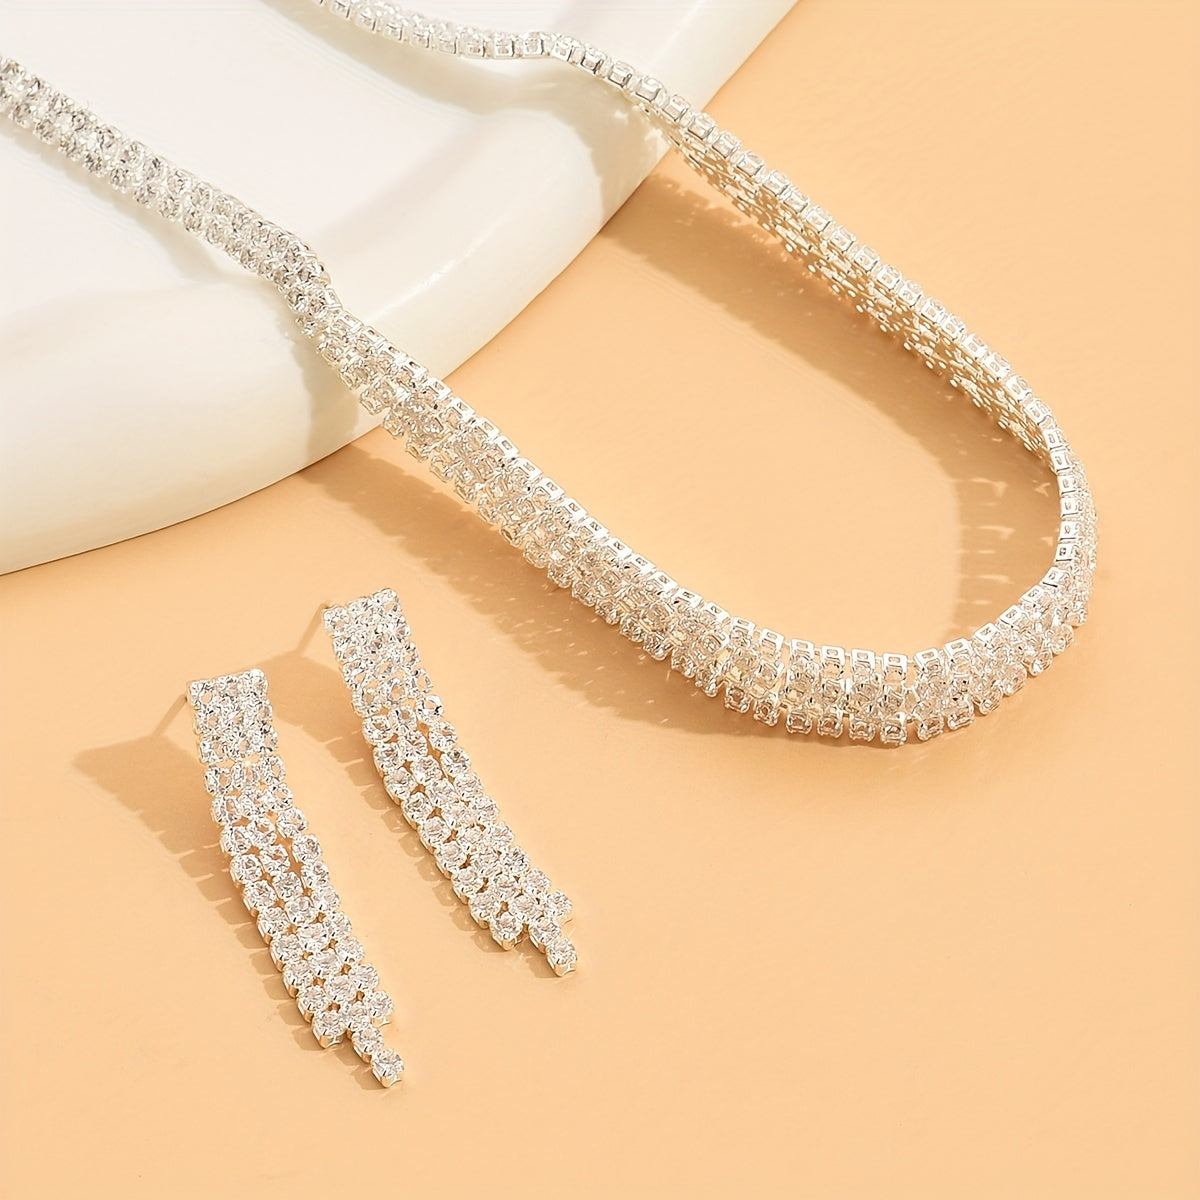 Sparkling Rhinestone Zircon Choker and Earrings Set for Bridal Wedding, Silver Plated Jewelry Gift